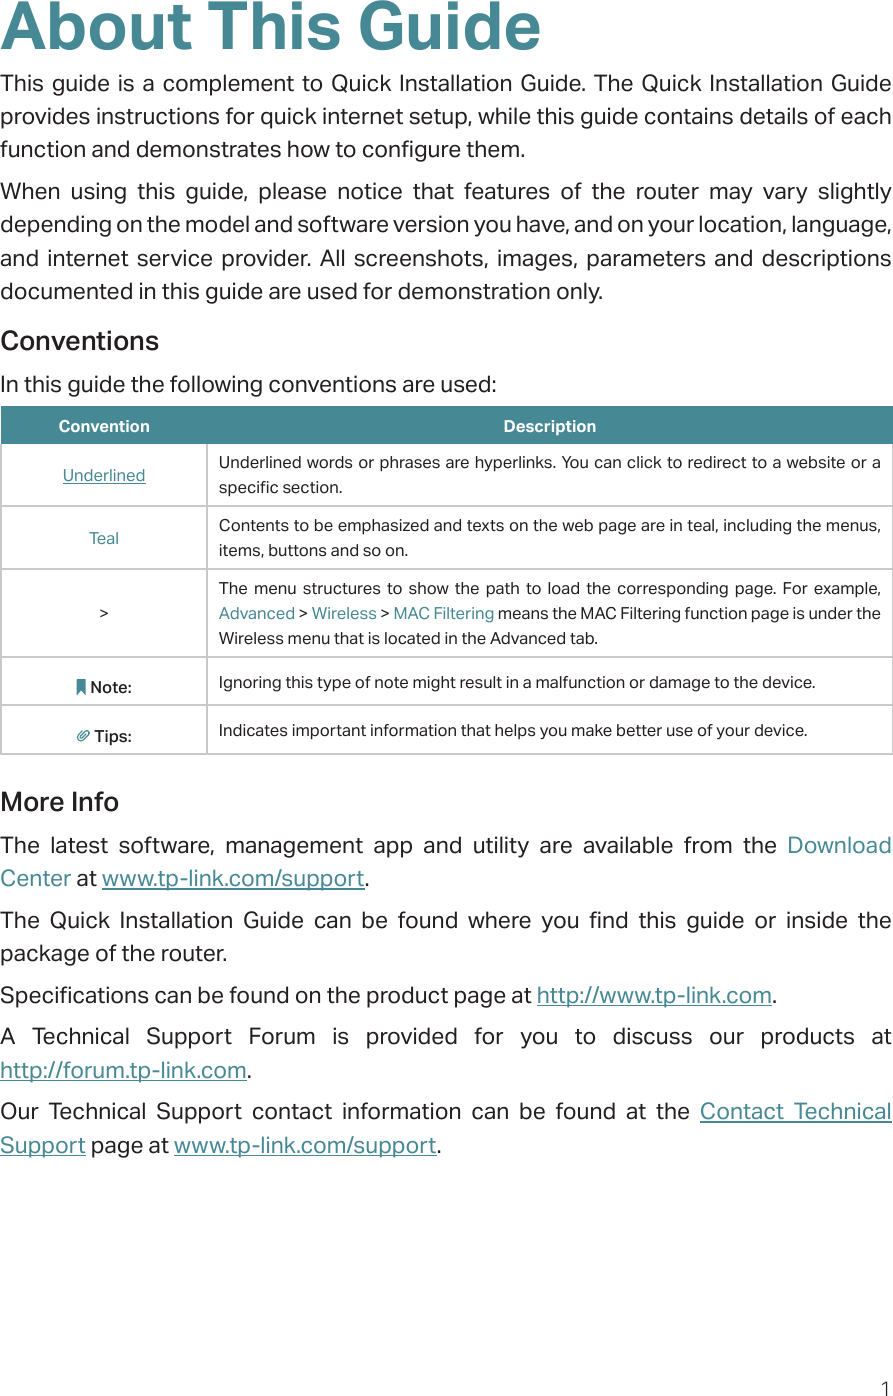 1About This GuideThis guide is a complement to Quick Installation Guide. The Quick Installation Guide provides instructions for quick internet setup, while this guide contains details of each function and demonstrates how to configure them. When using this guide, please notice that features of the router may vary slightly depending on the model and software version you have, and on your location, language, and internet service provider. All screenshots, images, parameters and descriptions documented in this guide are used for demonstration only.ConventionsIn this guide the following conventions are used:Convention DescriptionUnderlined Underlined words or phrases are hyperlinks. You can click to redirect to a website or a specific section.Teal Contents to be emphasized and texts on the web page are in teal, including the menus, items, buttons and so on.&gt;The menu structures to show the path to load the corresponding page. For example, Advanced &gt; Wireless &gt; MAC Filtering means the MAC Filtering function page is under the Wireless menu that is located in the Advanced tab.Note: Ignoring this type of note might result in a malfunction or damage to the device.Tips: Indicates important information that helps you make better use of your device.More InfoThe latest software, management app and utility are available from the Download Center at www.tp-link.com/support.The Quick Installation Guide can be found where you find this guide or inside the package of the router.Specifications can be found on the product page at http://www.tp-link.com.A Technical Support Forum is provided for you to discuss our products at  http://forum.tp-link.com.Our Technical Support contact information can be found at the Contact Technical Support page at www.tp-link.com/support.